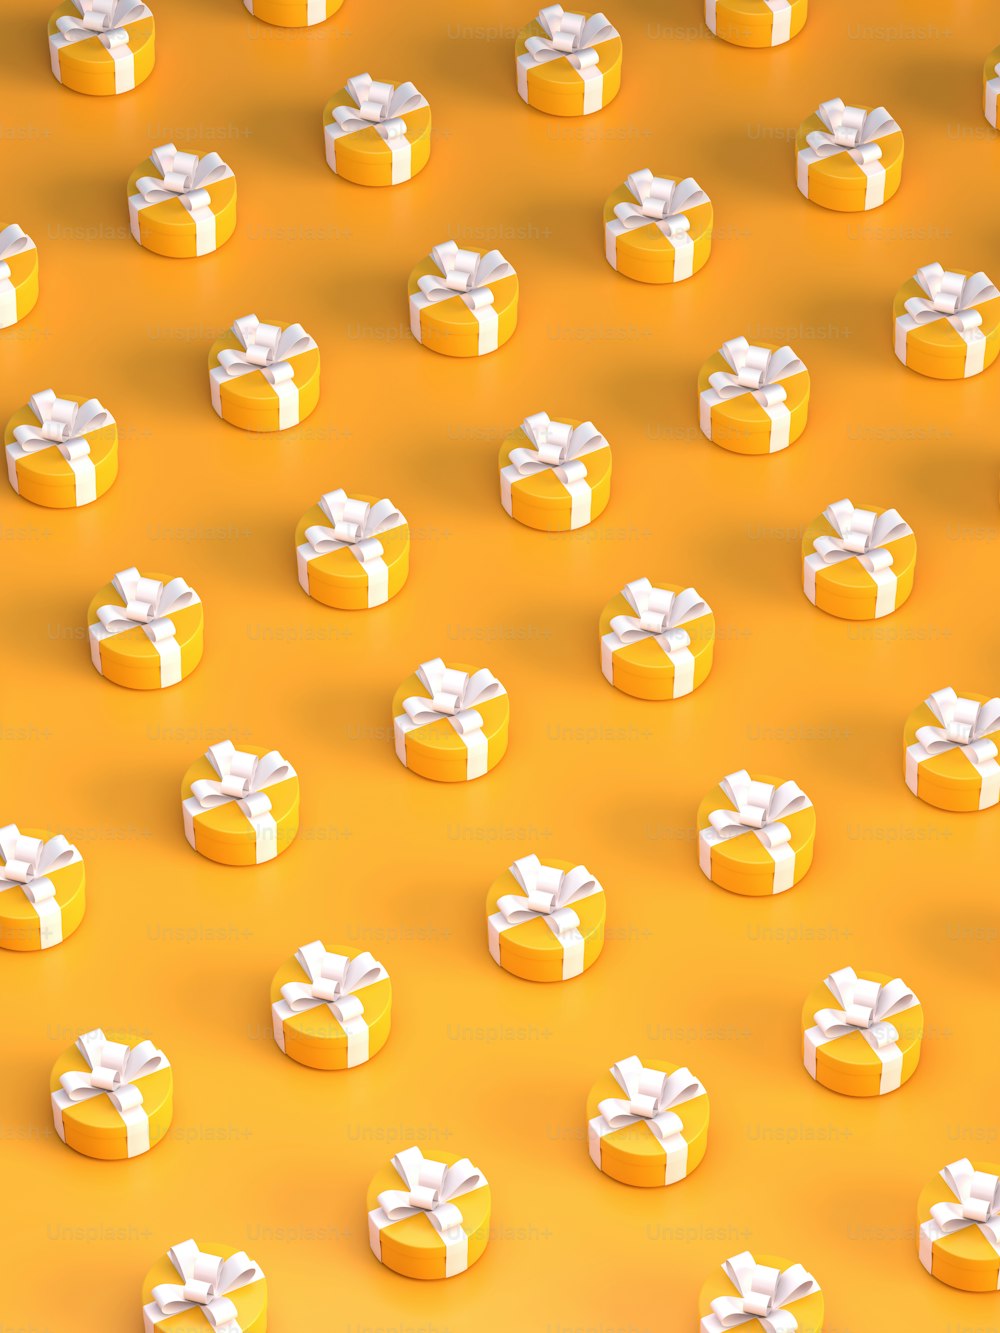 a group of yellow boxes with white bows